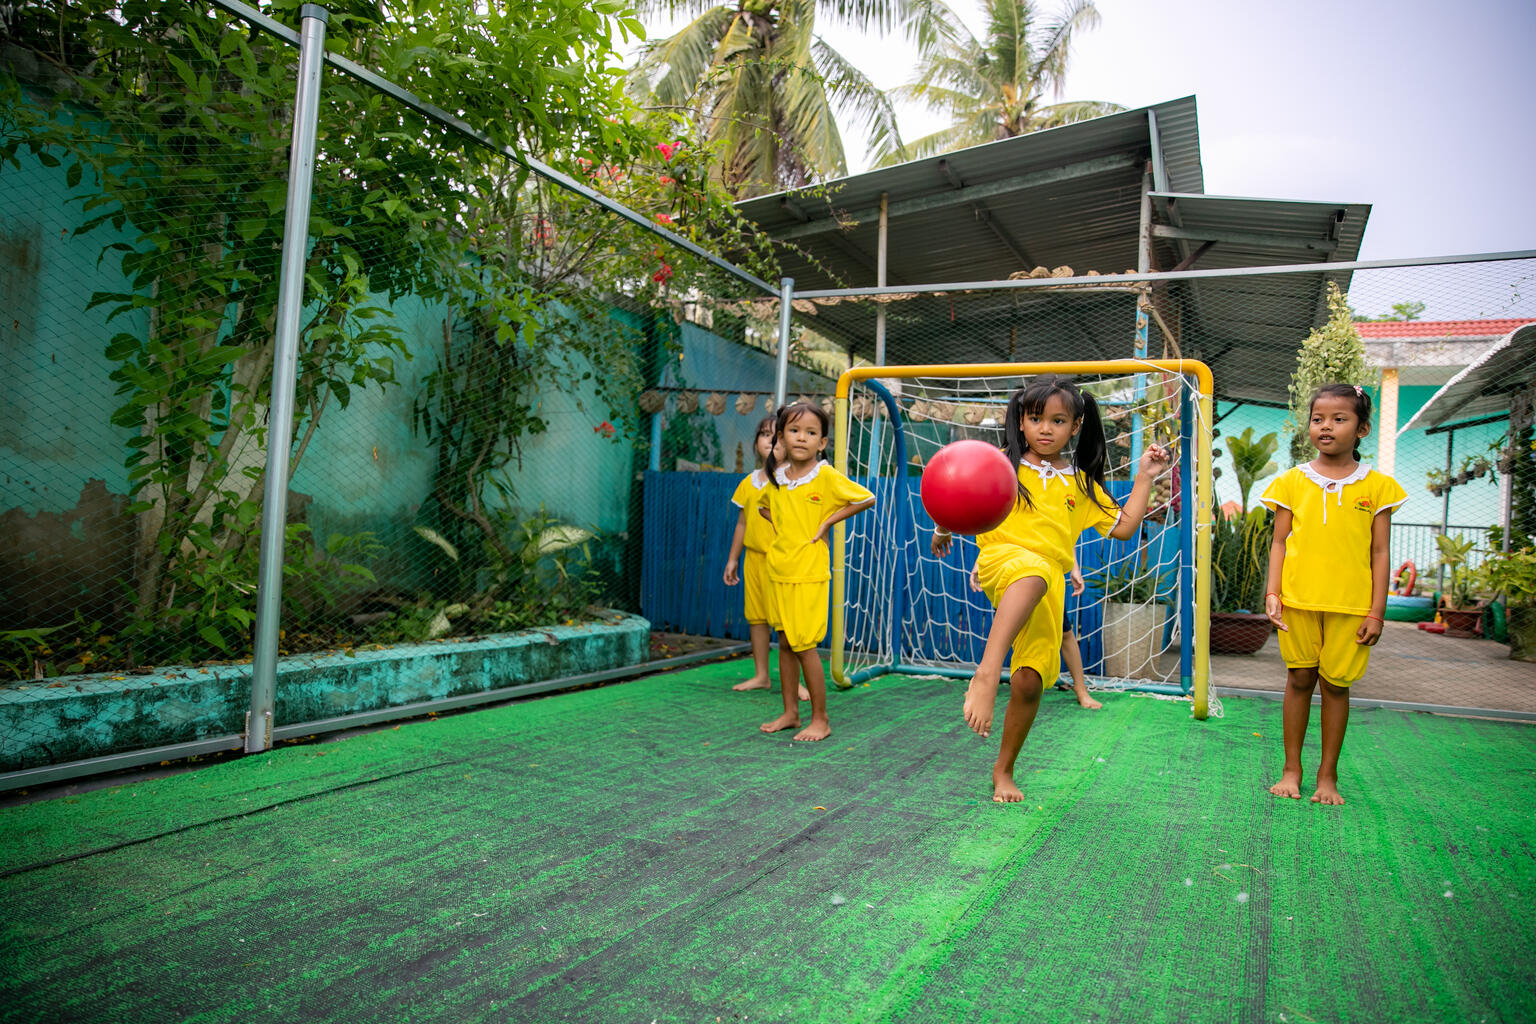 A 5-year-old girl playing football with her friends in Vietnam.